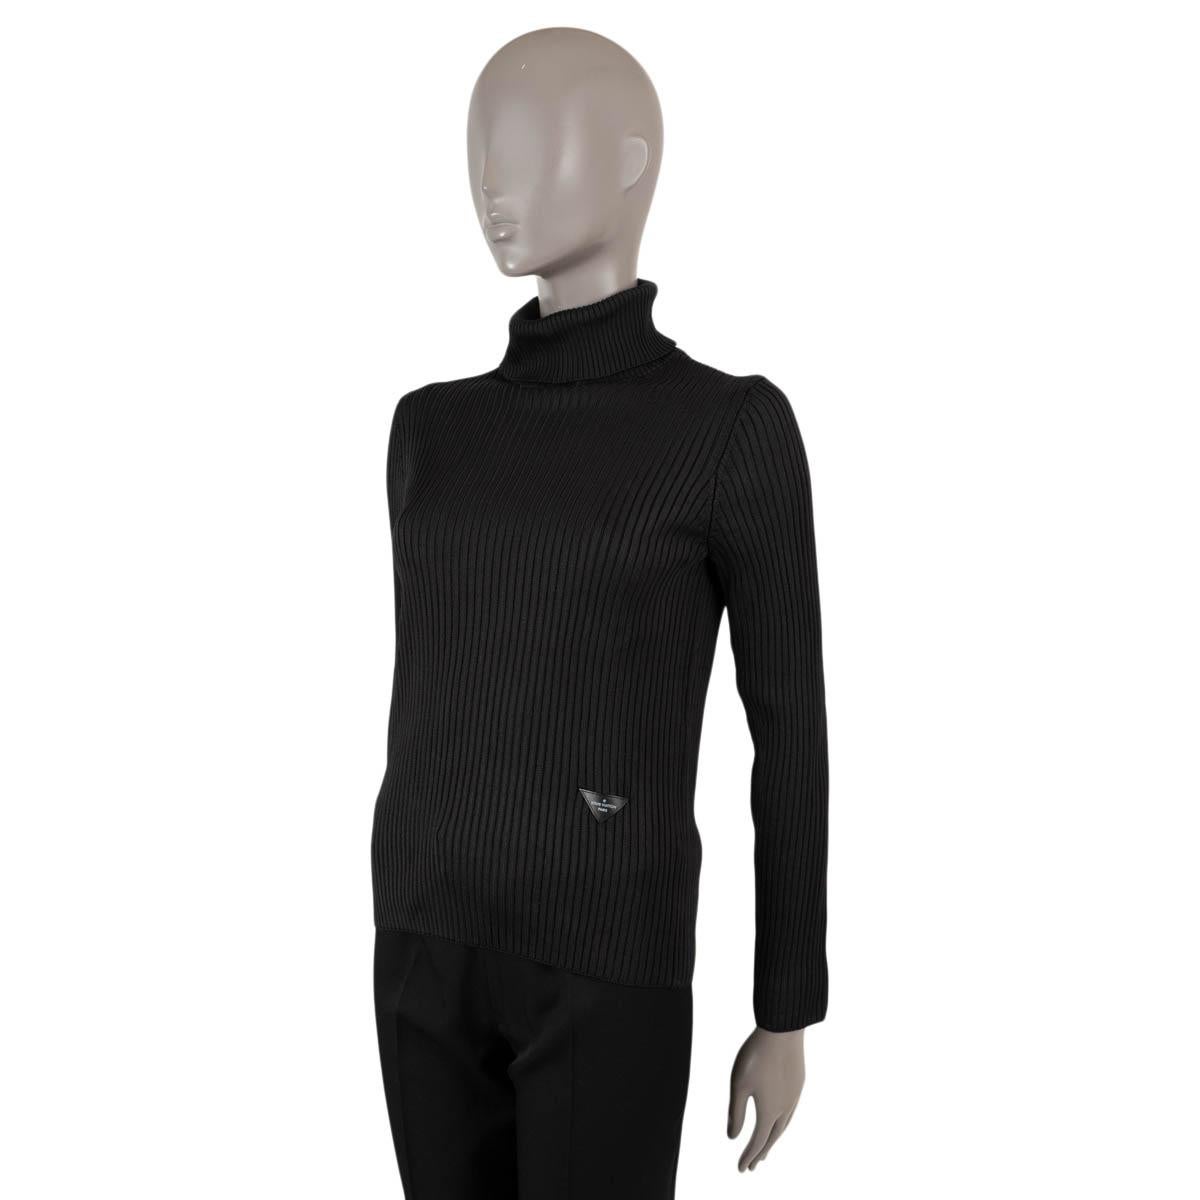 100% authentic Louis Vuitton turtleneck sweater in black rib-knit silk (100%) with a triangle logo on the front. Unlined. Has been worn and is in excellent condition.

2017 Fall/Winter

Measurements
Model	RW172B FFX FDKL61
Tag Size	M
Size	M
Shoulder